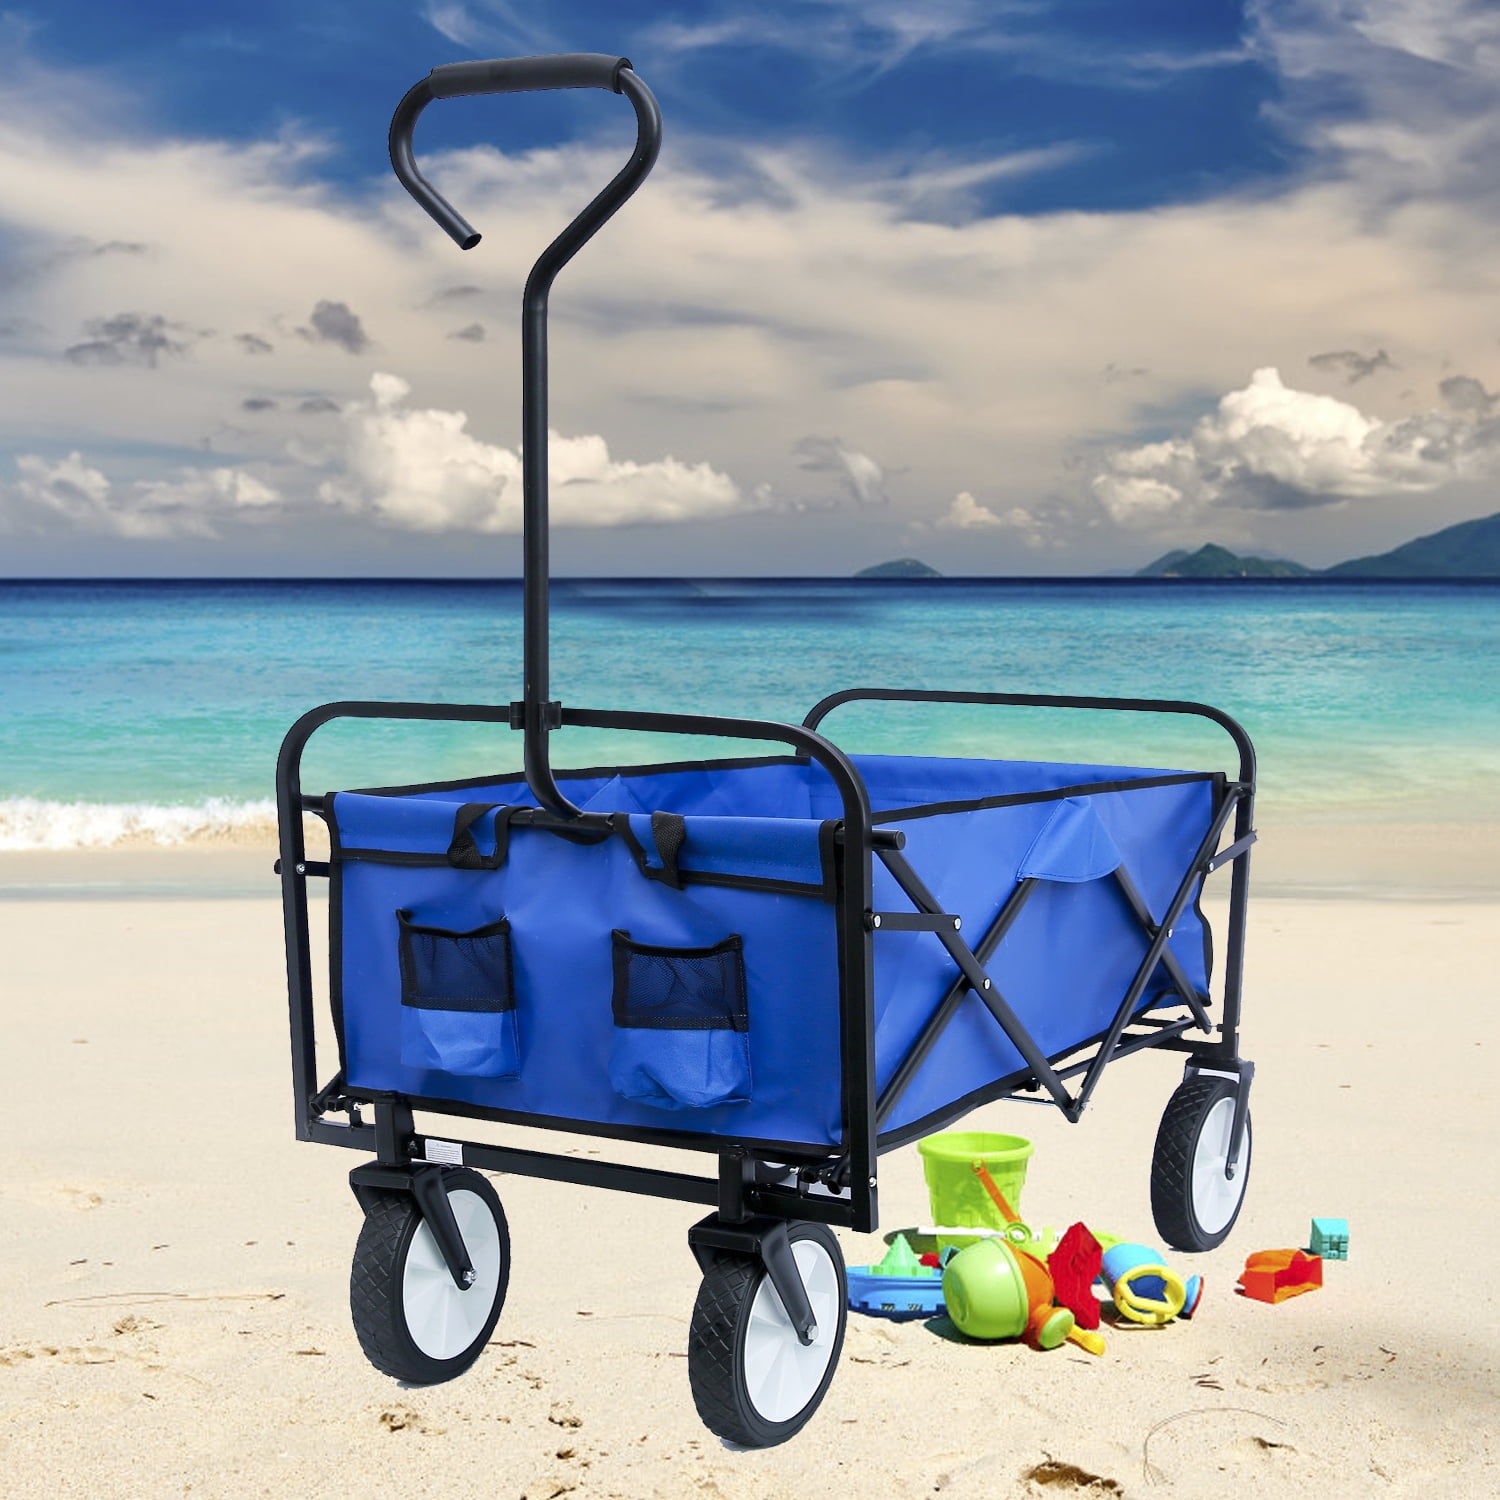 Collapsible Folding Wagon Cart Kid Toy Camping Beach Trolley Garden Utility Cart 